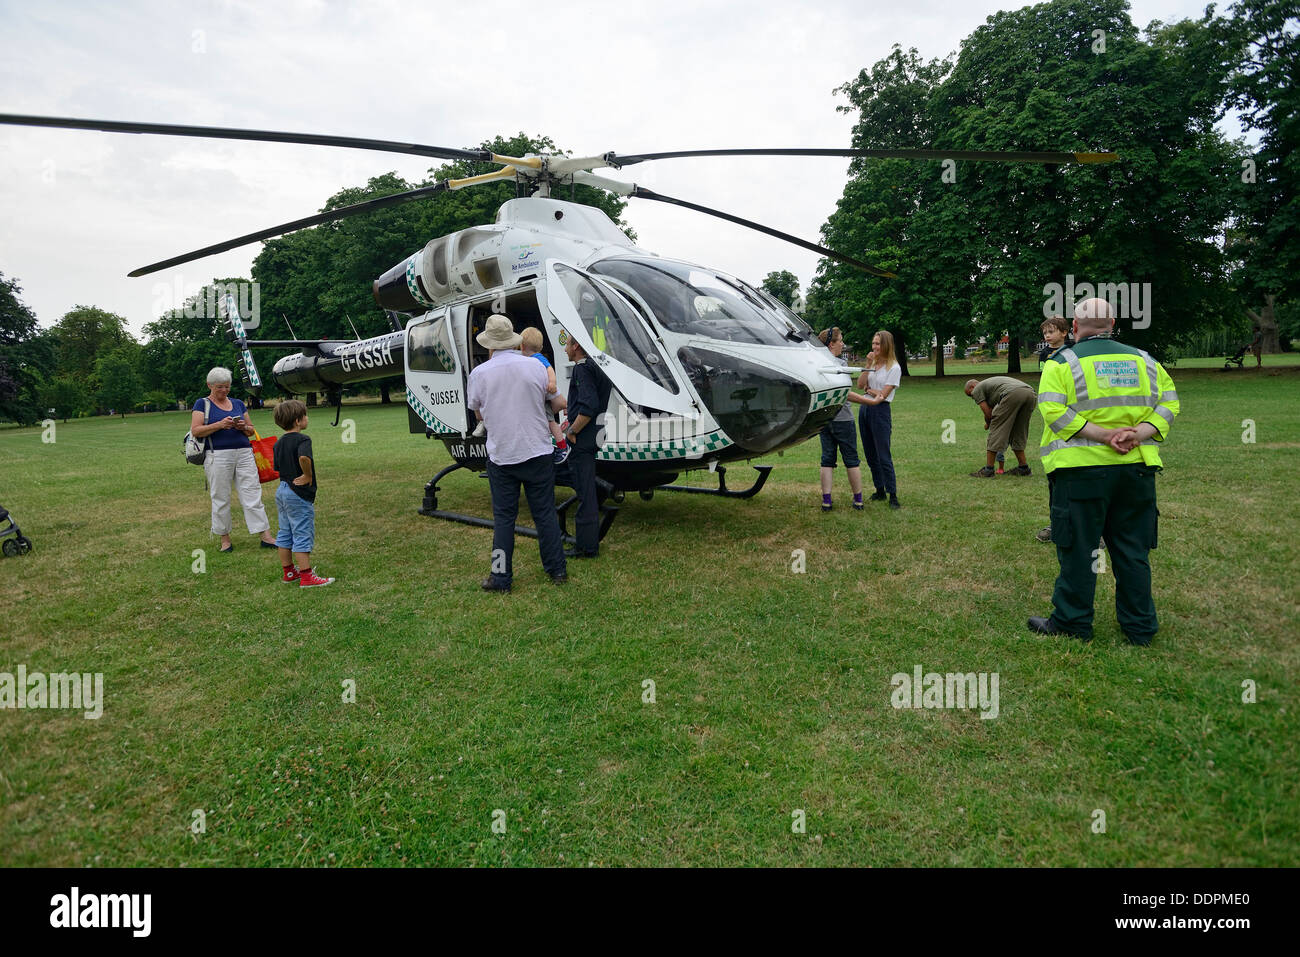 Emergency services helicopter in one of many London parks Stock Photo